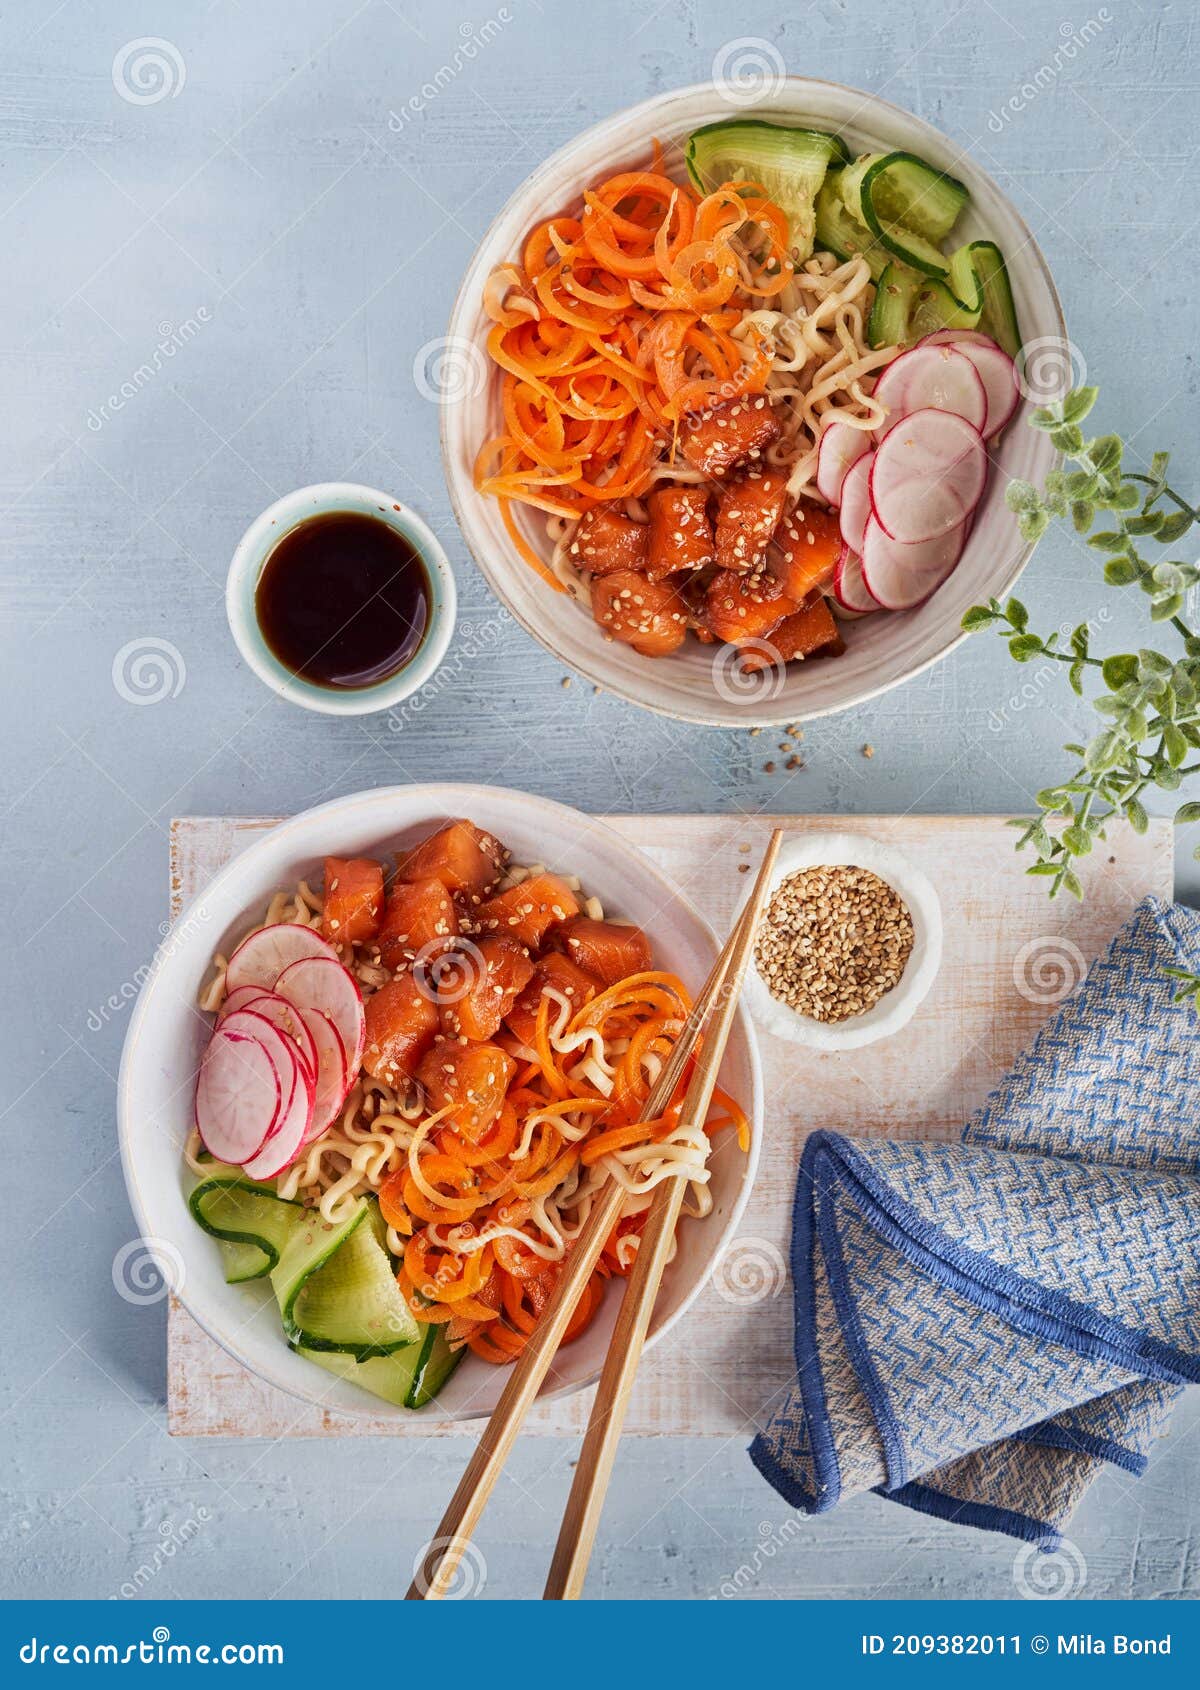 Noodles with Vegetables, Marinated Salmon Sashimi, Carrot Noodles ...